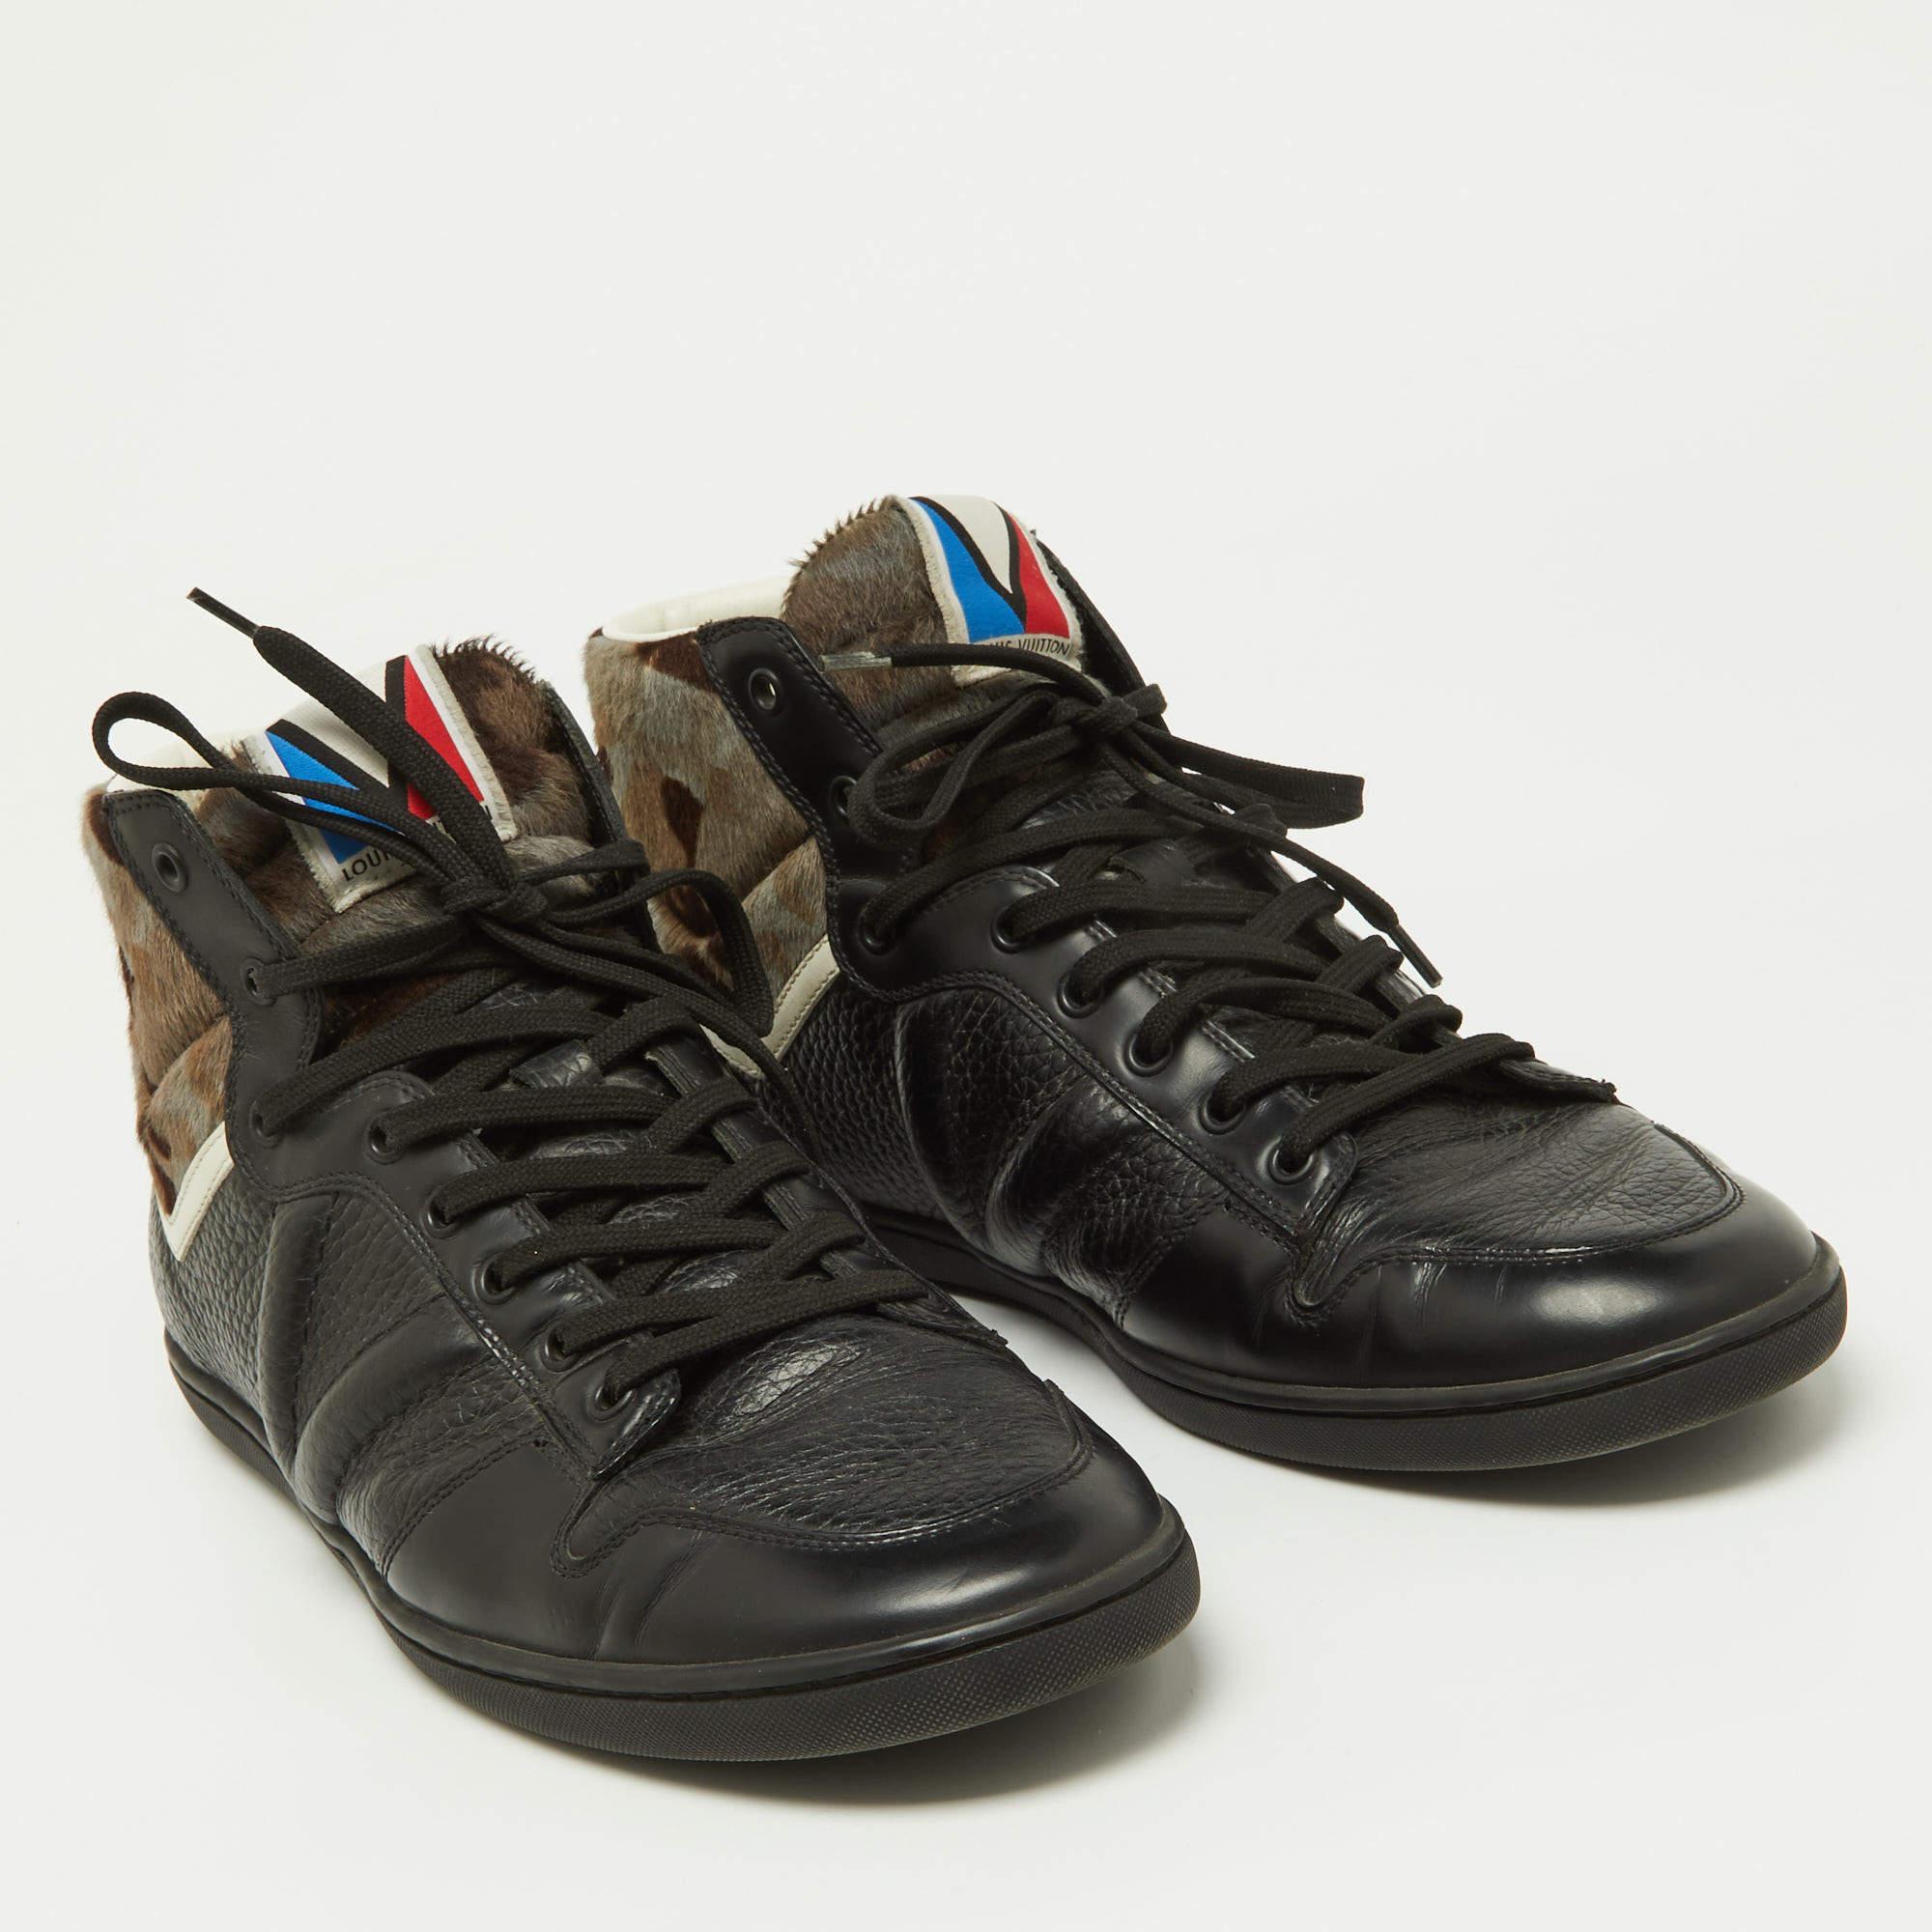 Louis Vuitton Black Leather and Calfhair Trainer High Top Sneakers Size 43 In Good Condition For Sale In Dubai, Al Qouz 2